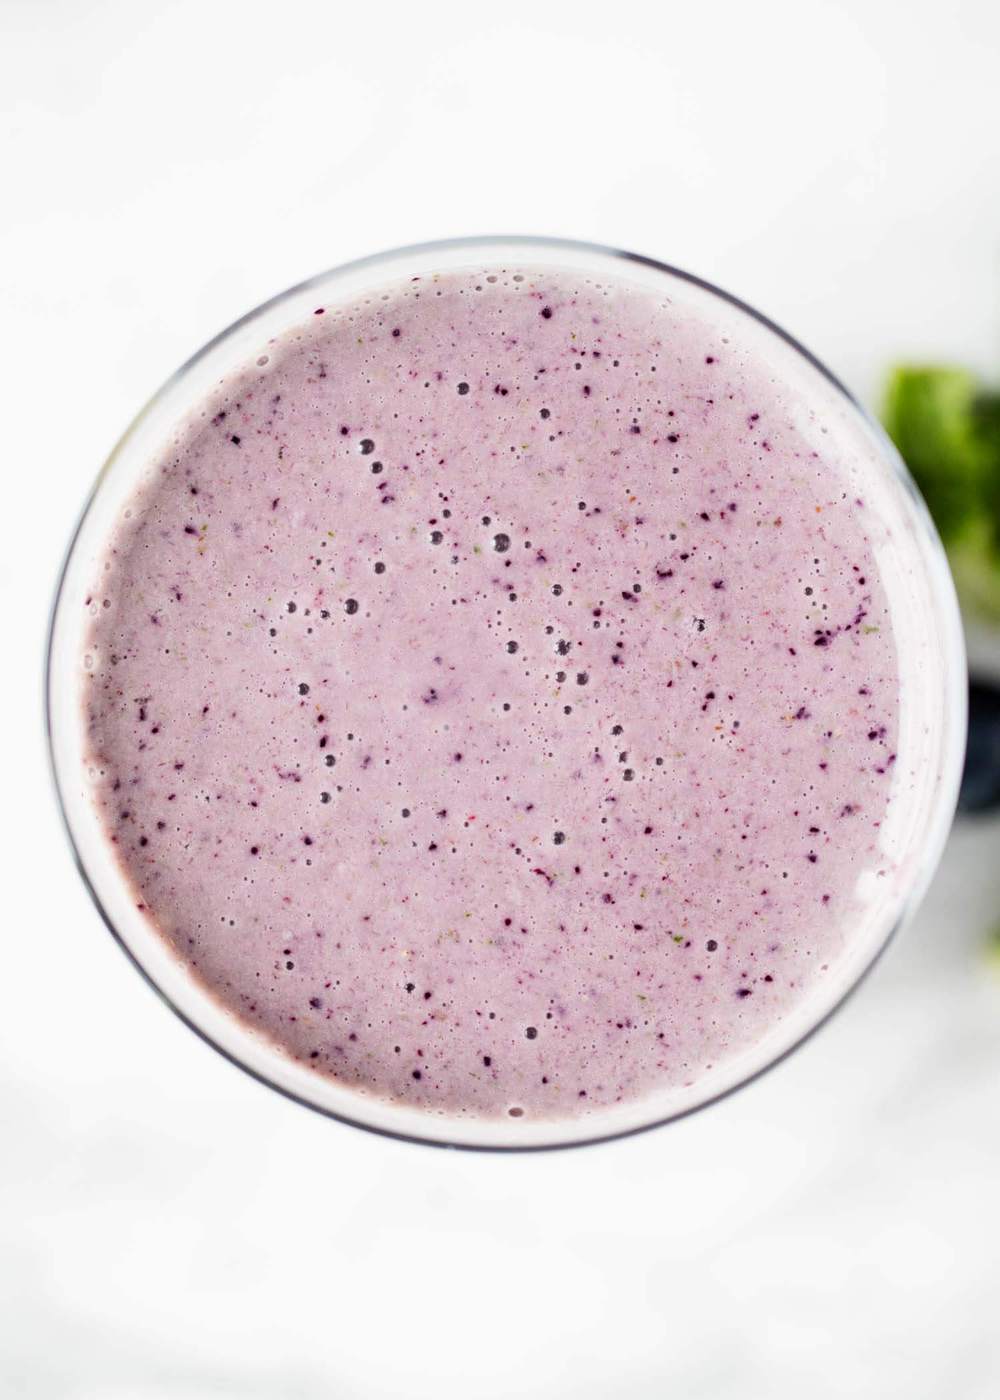 kale berry smoothie in glass 